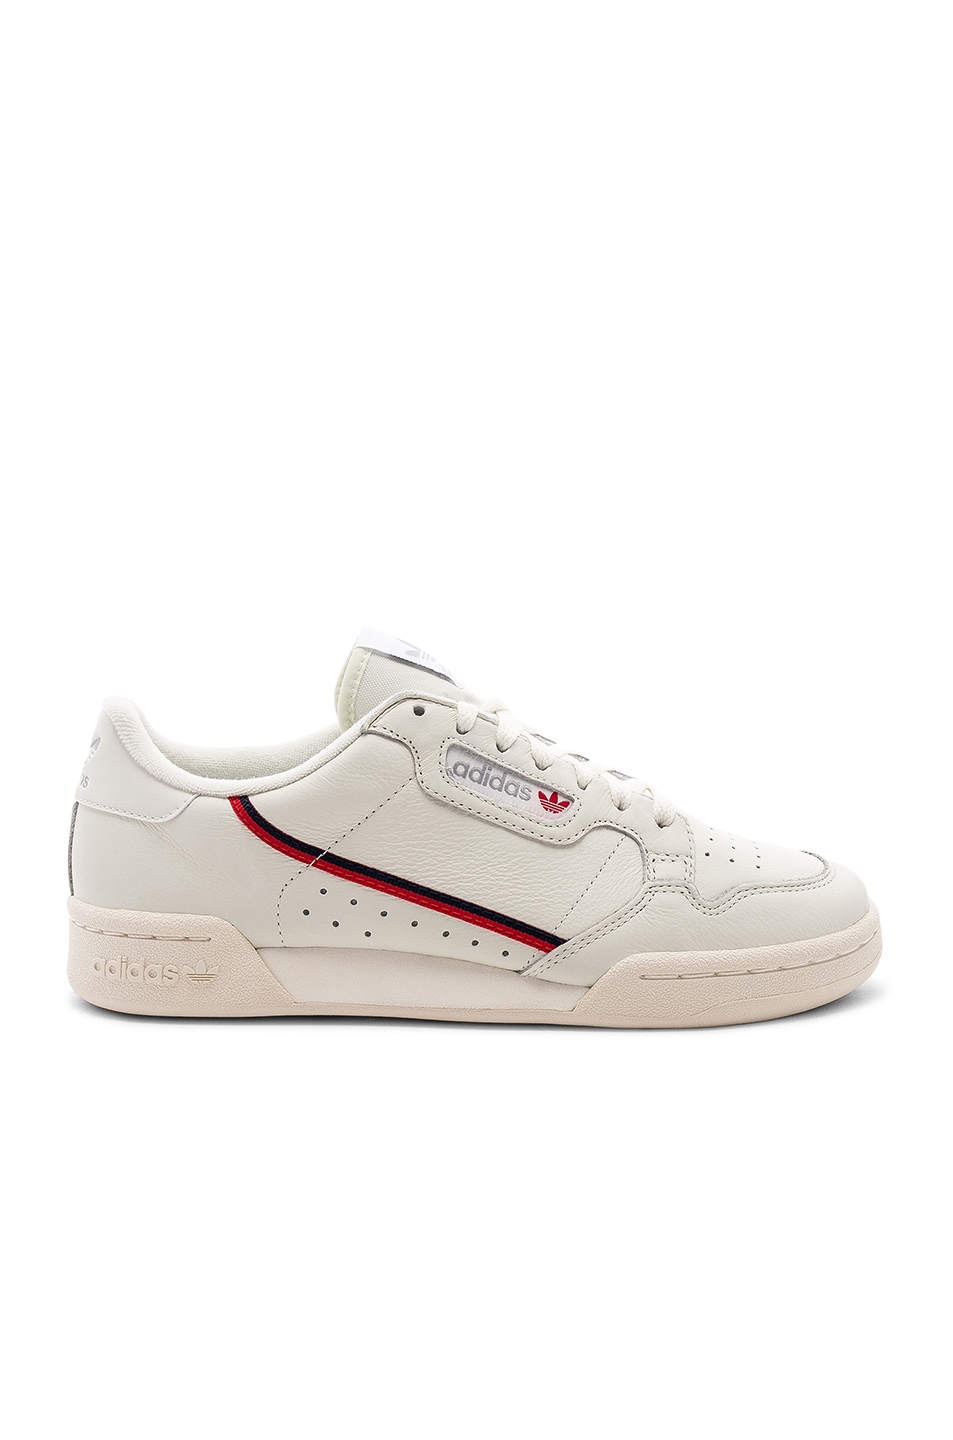 Image 1 of adidas Originals Rascal in White Tint & Off White & Scarlet